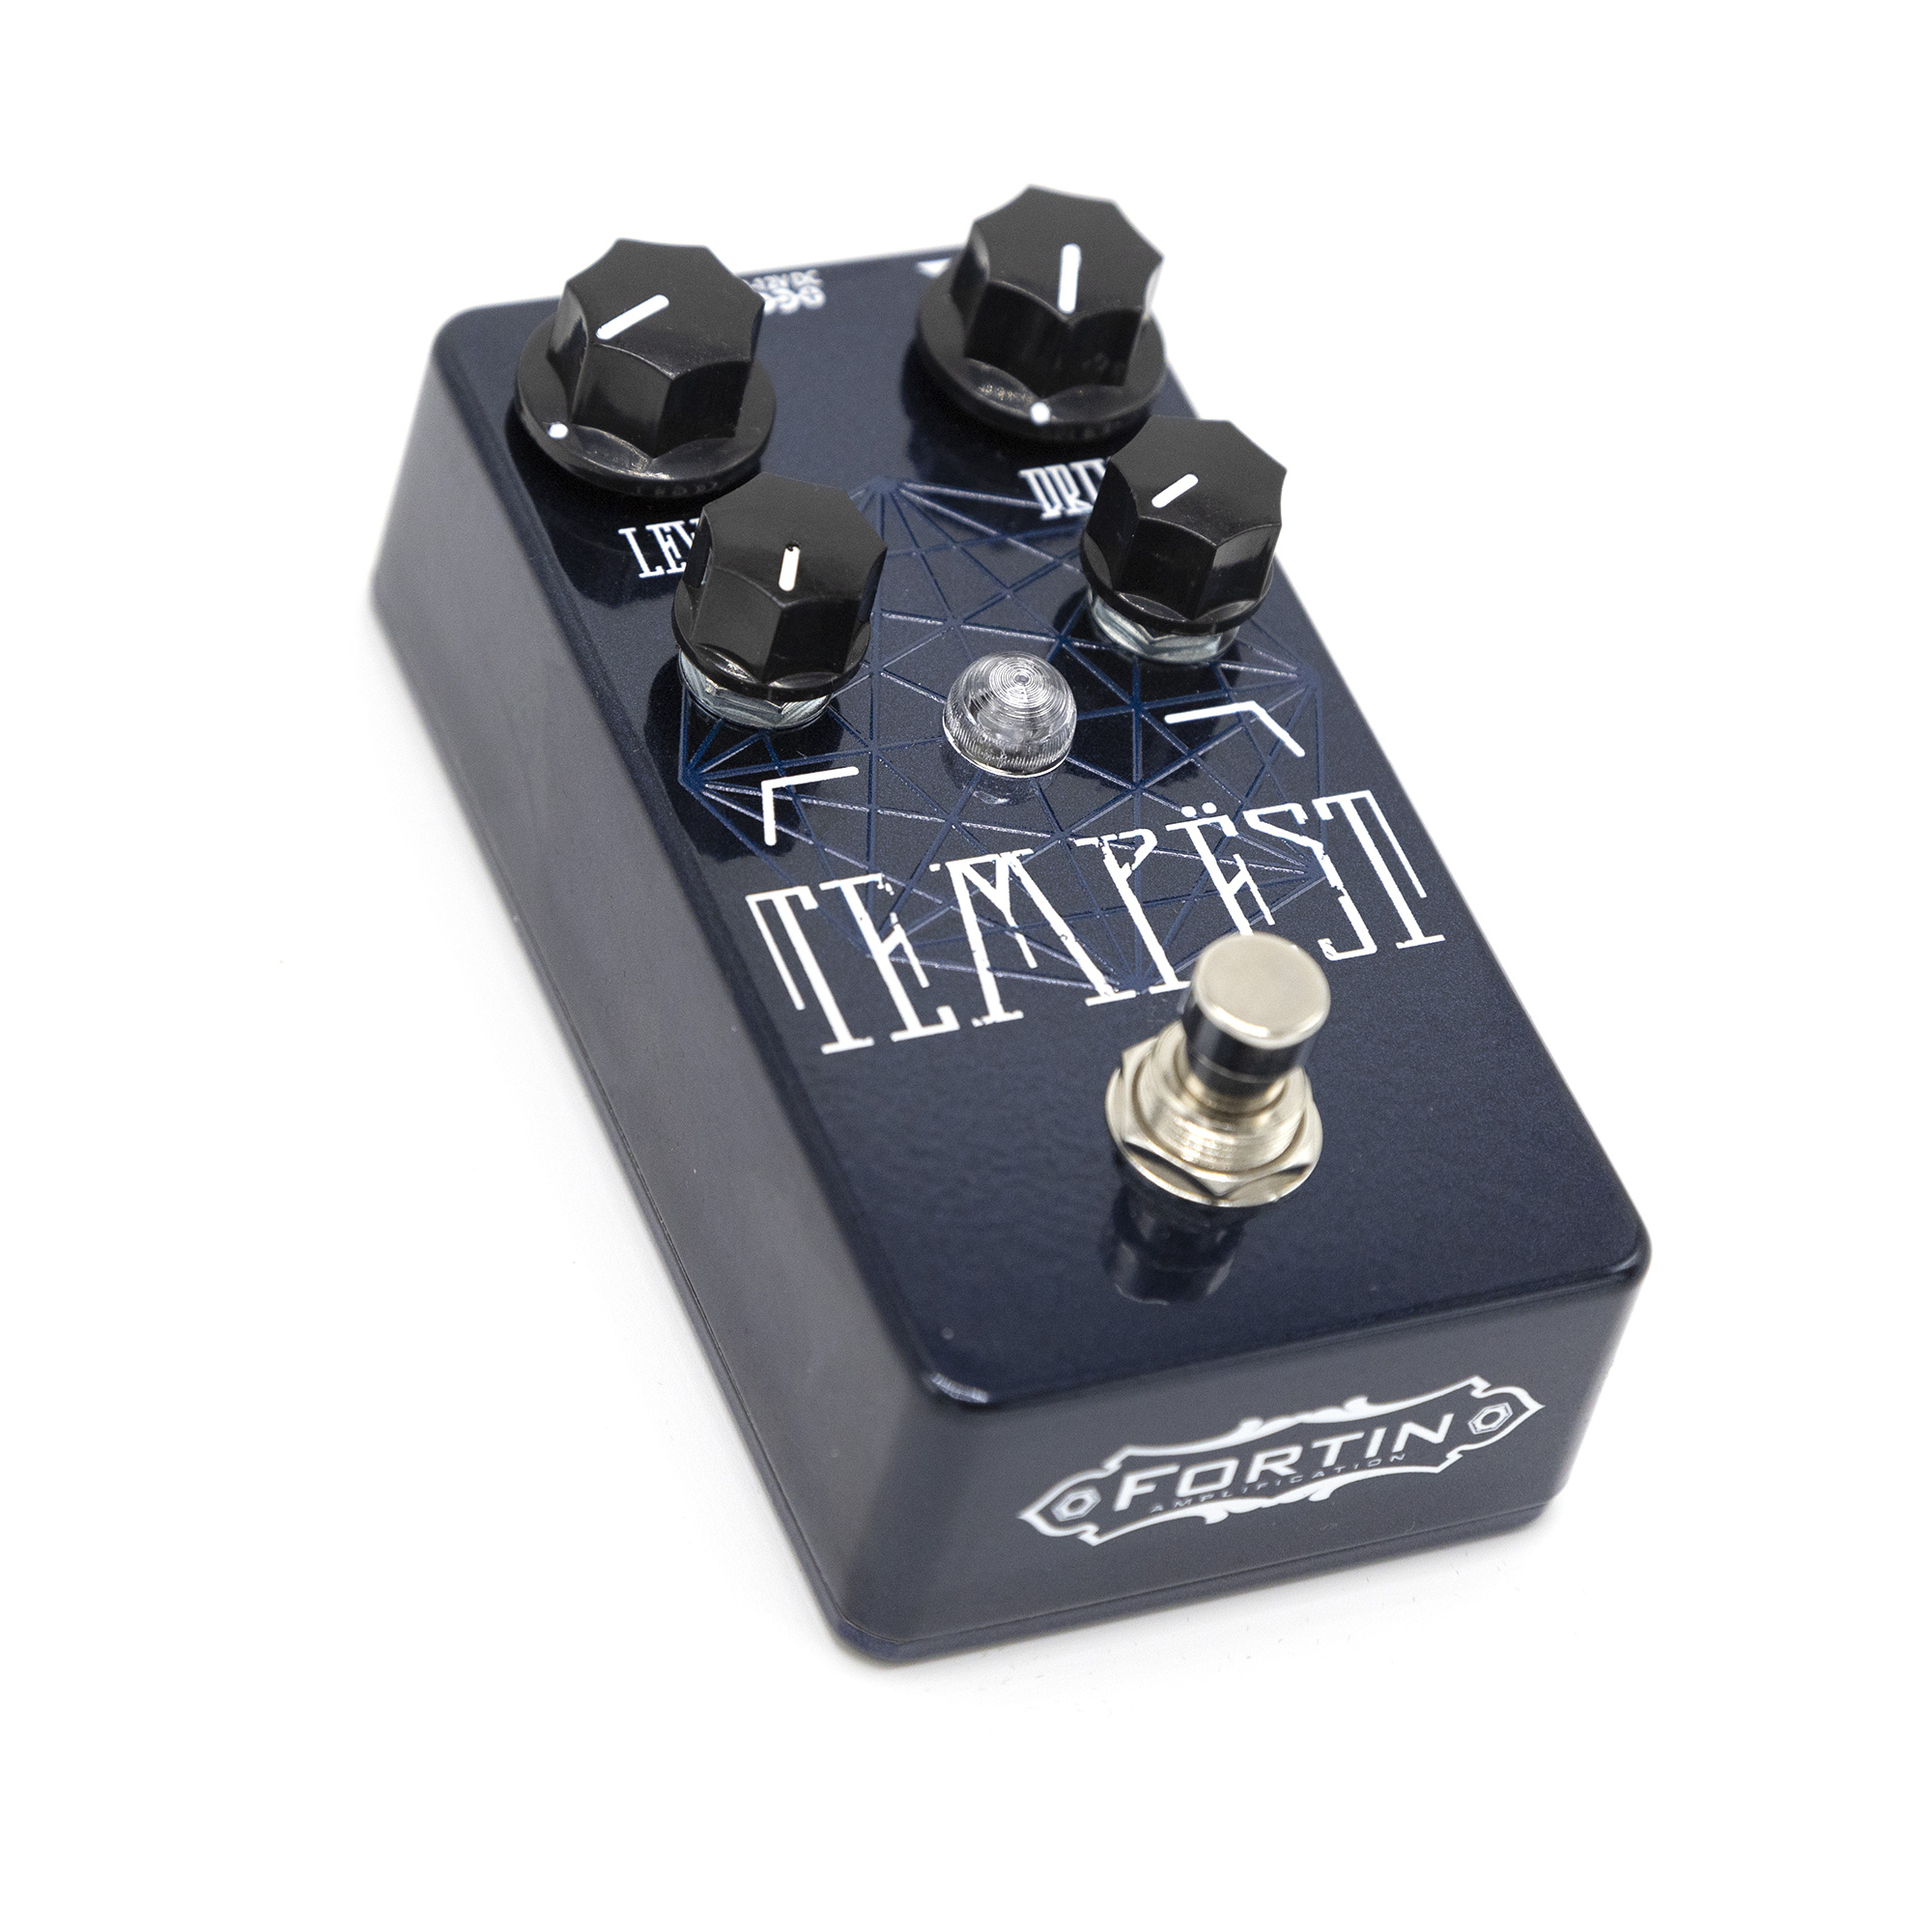 Fortin Amps Tempest Architects Signature Pedal - PÉdale Overdrive / Distortion / Fuzz - Variation 1